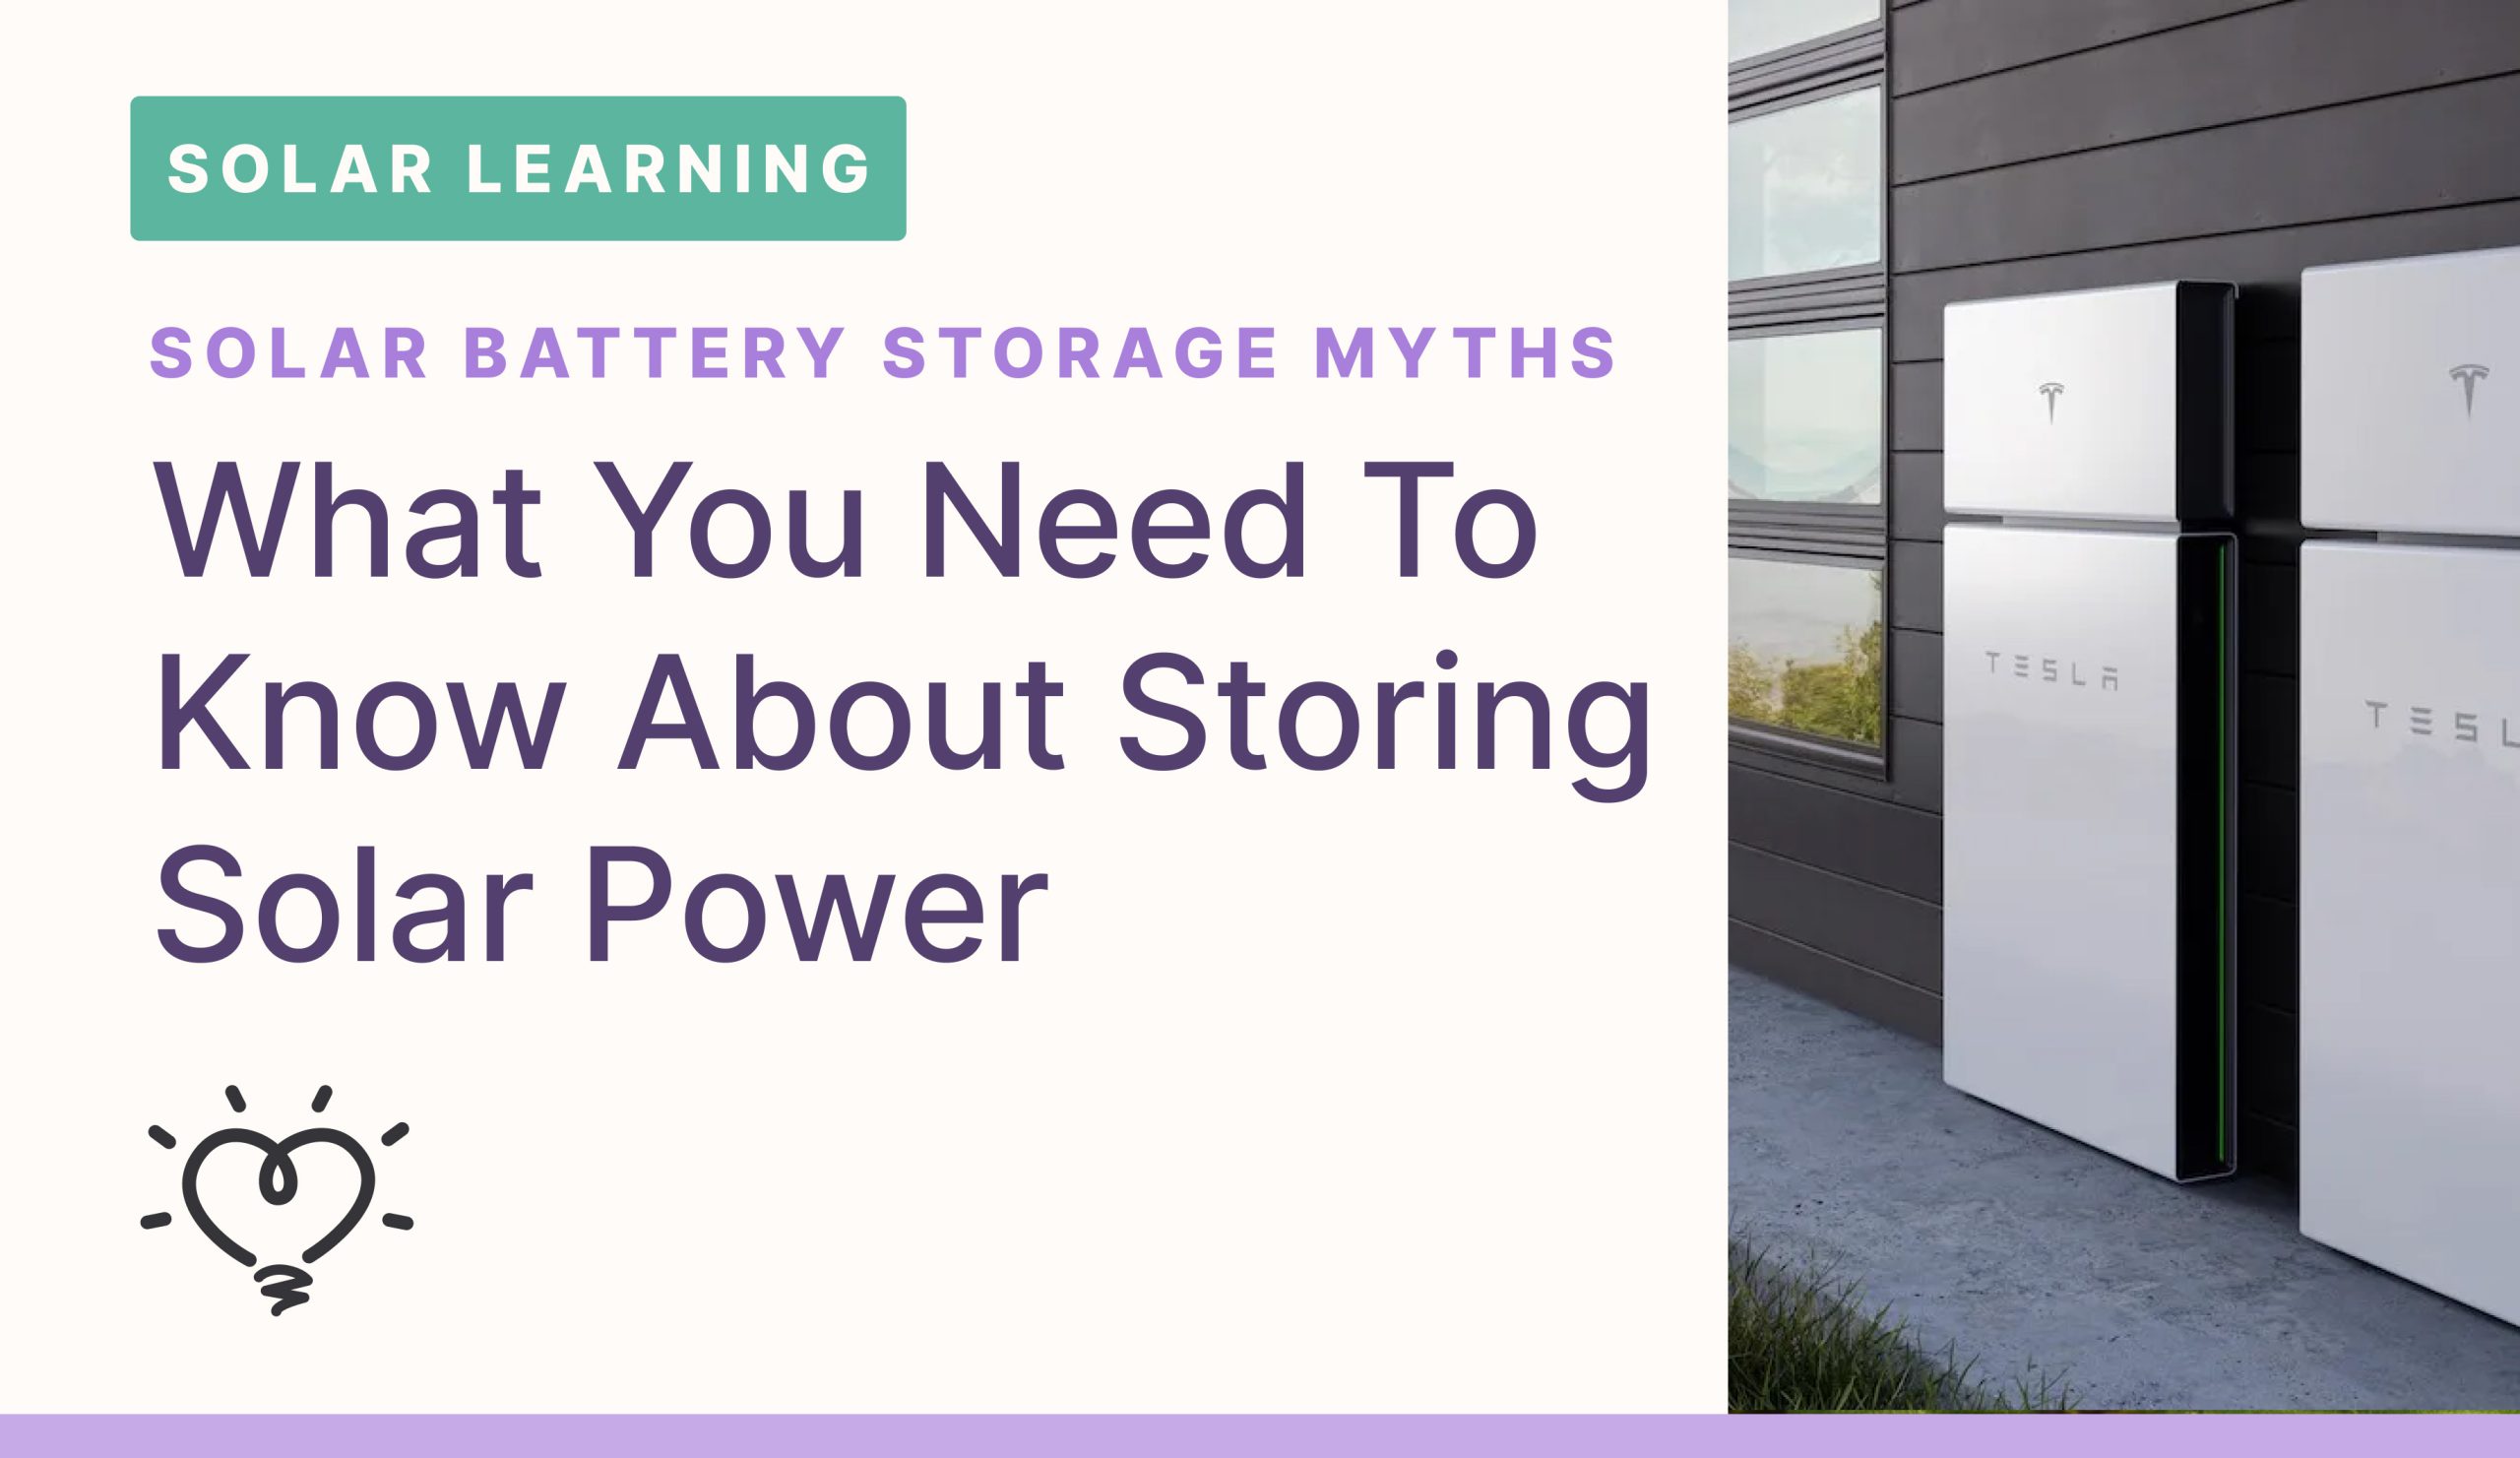 Solar Battery Storage Myths (Debunked) – What You Need To Know About Storing Solar Power